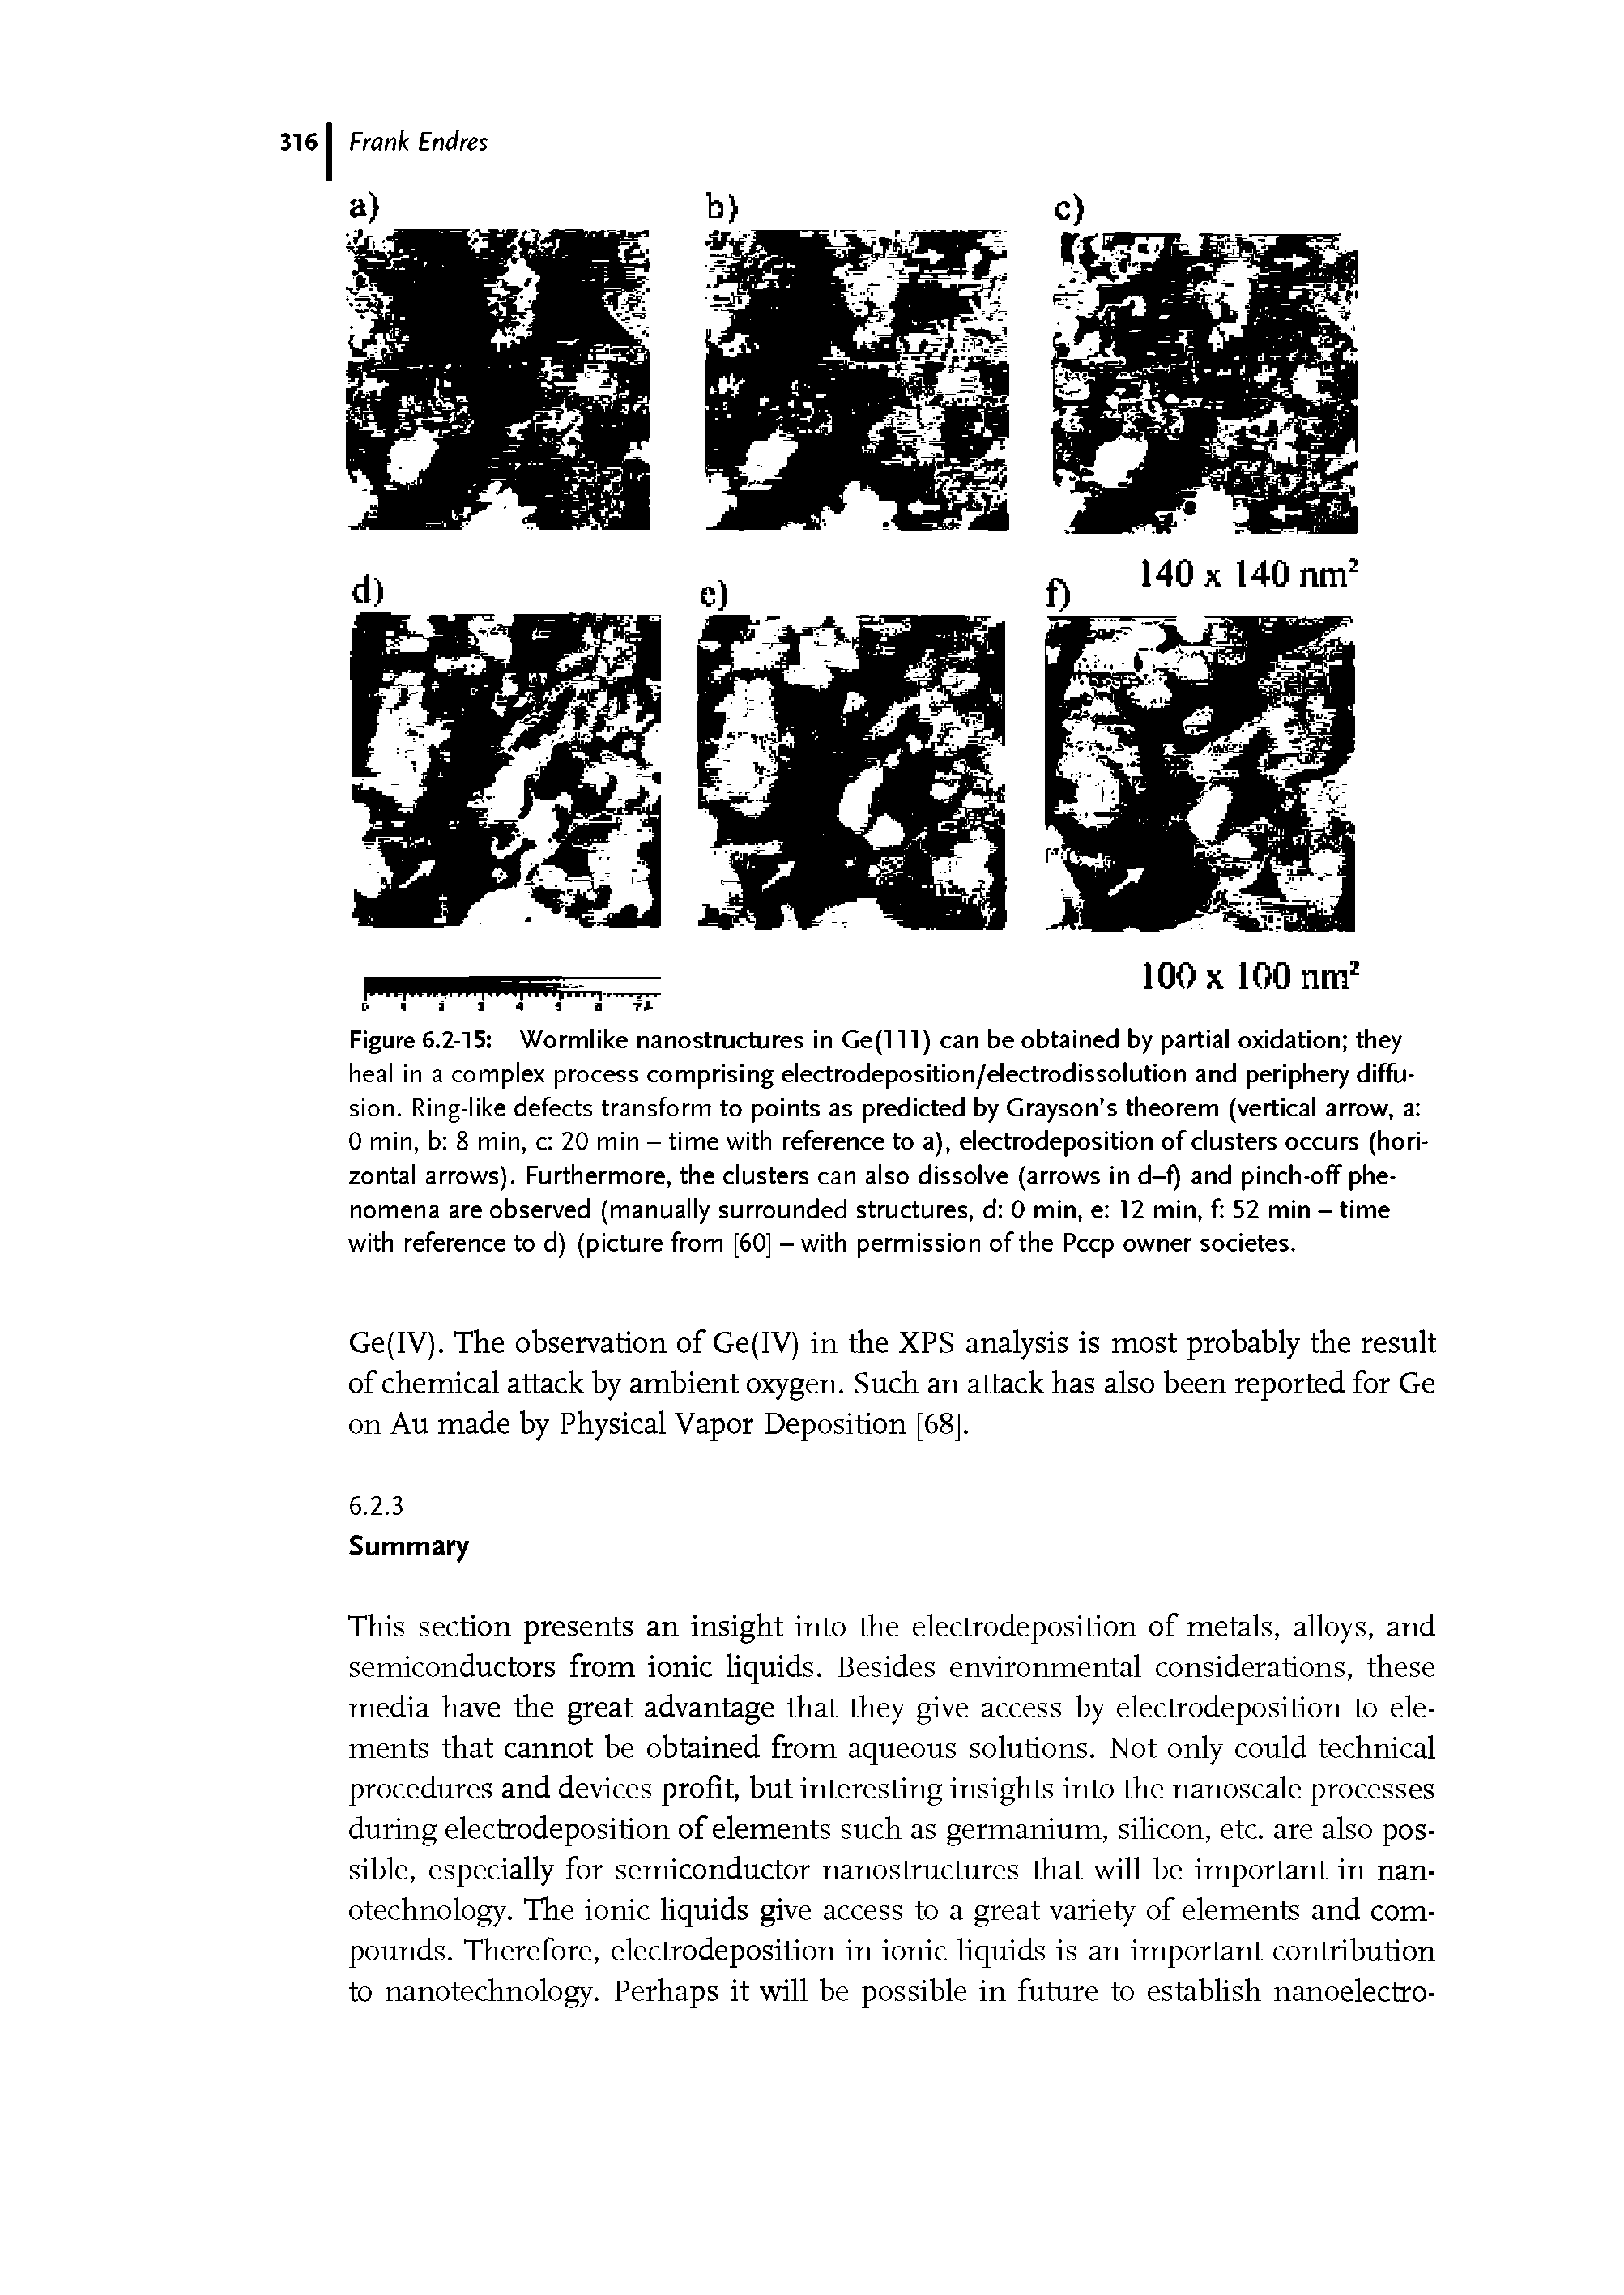 Figure 6.2-15 Wormlike nanostructures in Ge(l 11) can be obtained by partial oxidation they heal in a complex process comprising electrodeposition/electrodissolution and periphery diffusion. Ring-like defects transform to points as predicted by Grayson s theorem (vertical arrow, a 0 min, b 8 min, c 20 min - time with reference to a), electrodeposition of clusters occurs (horizontal arrows). Furthermore, the clusters can also dissolve (arrows in d-f) and pinch-off phenomena are observed (manually surrounded structures, d 0 min, e 12 min, f 52 min - time with reference to d) (picture from [60] - with permission of the Peep owner societes.